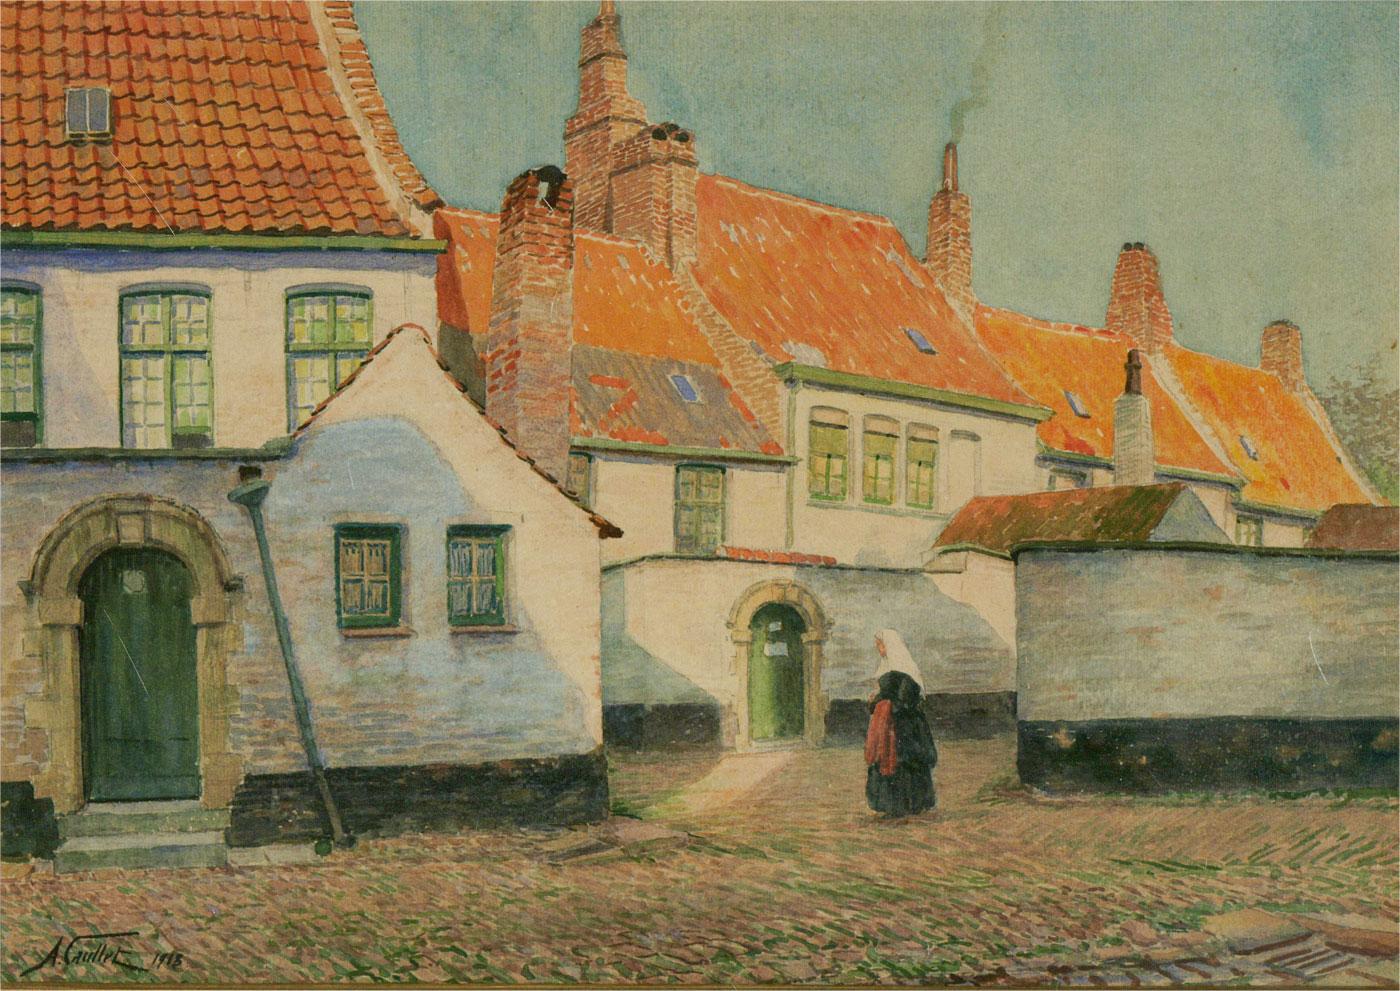 A charming early 20th Century watercolour showing a nun walking through the buildings of an old school house. The sun is shining down onto the red tiled roofs and casting shafting shadows on the cobbles at the nun's feet. The artist has signed and